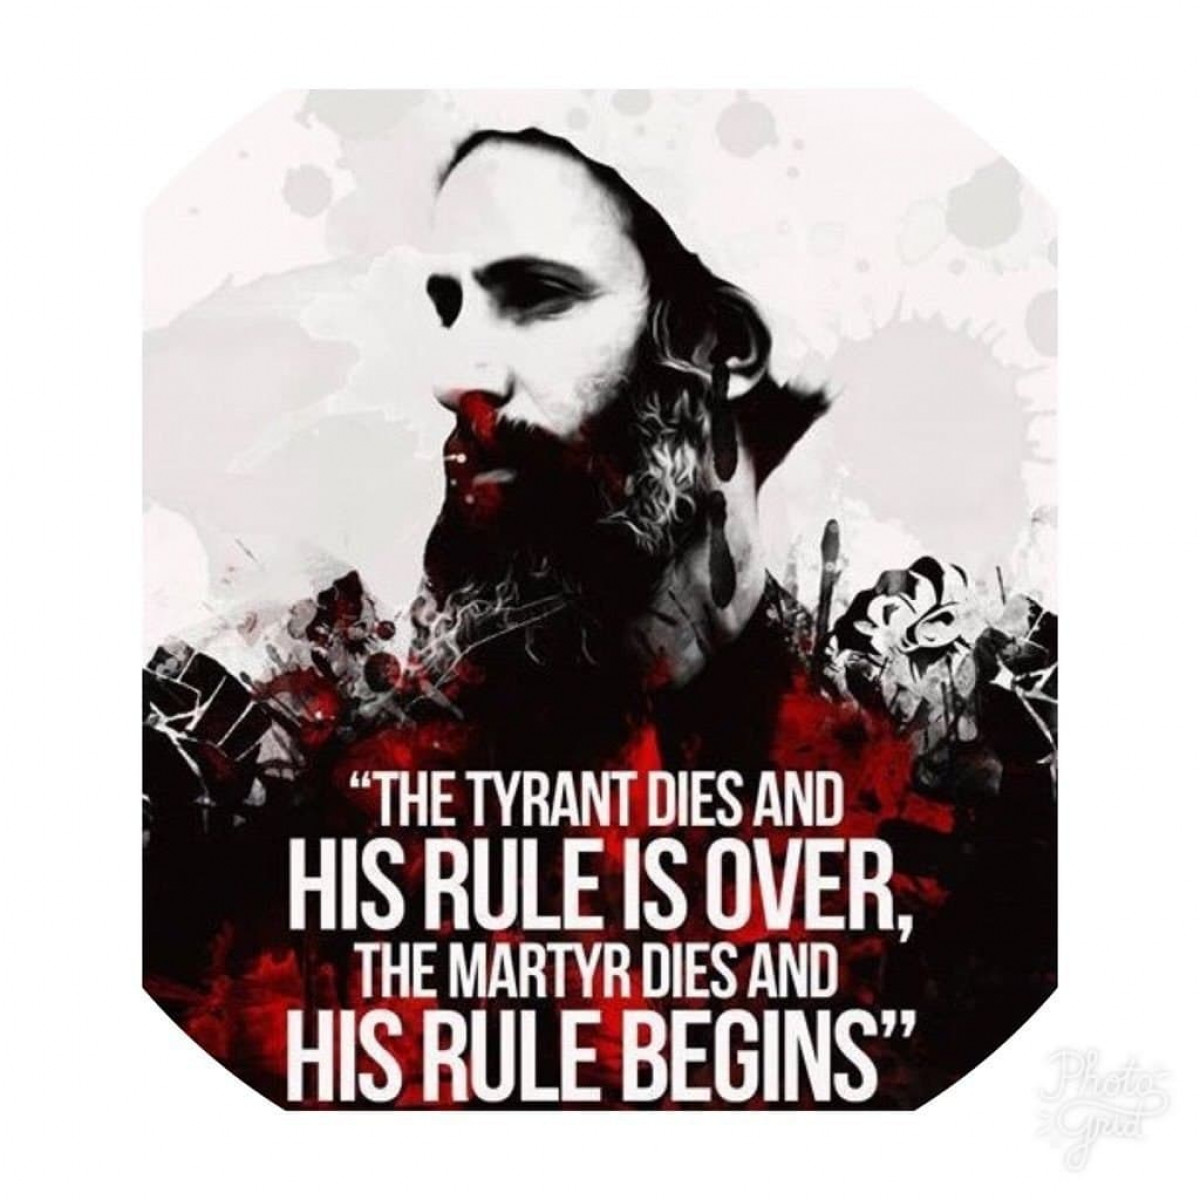 The tyrant dies and HIS RULES IS OVER, the martyr dies and HIS RULE BEGINS